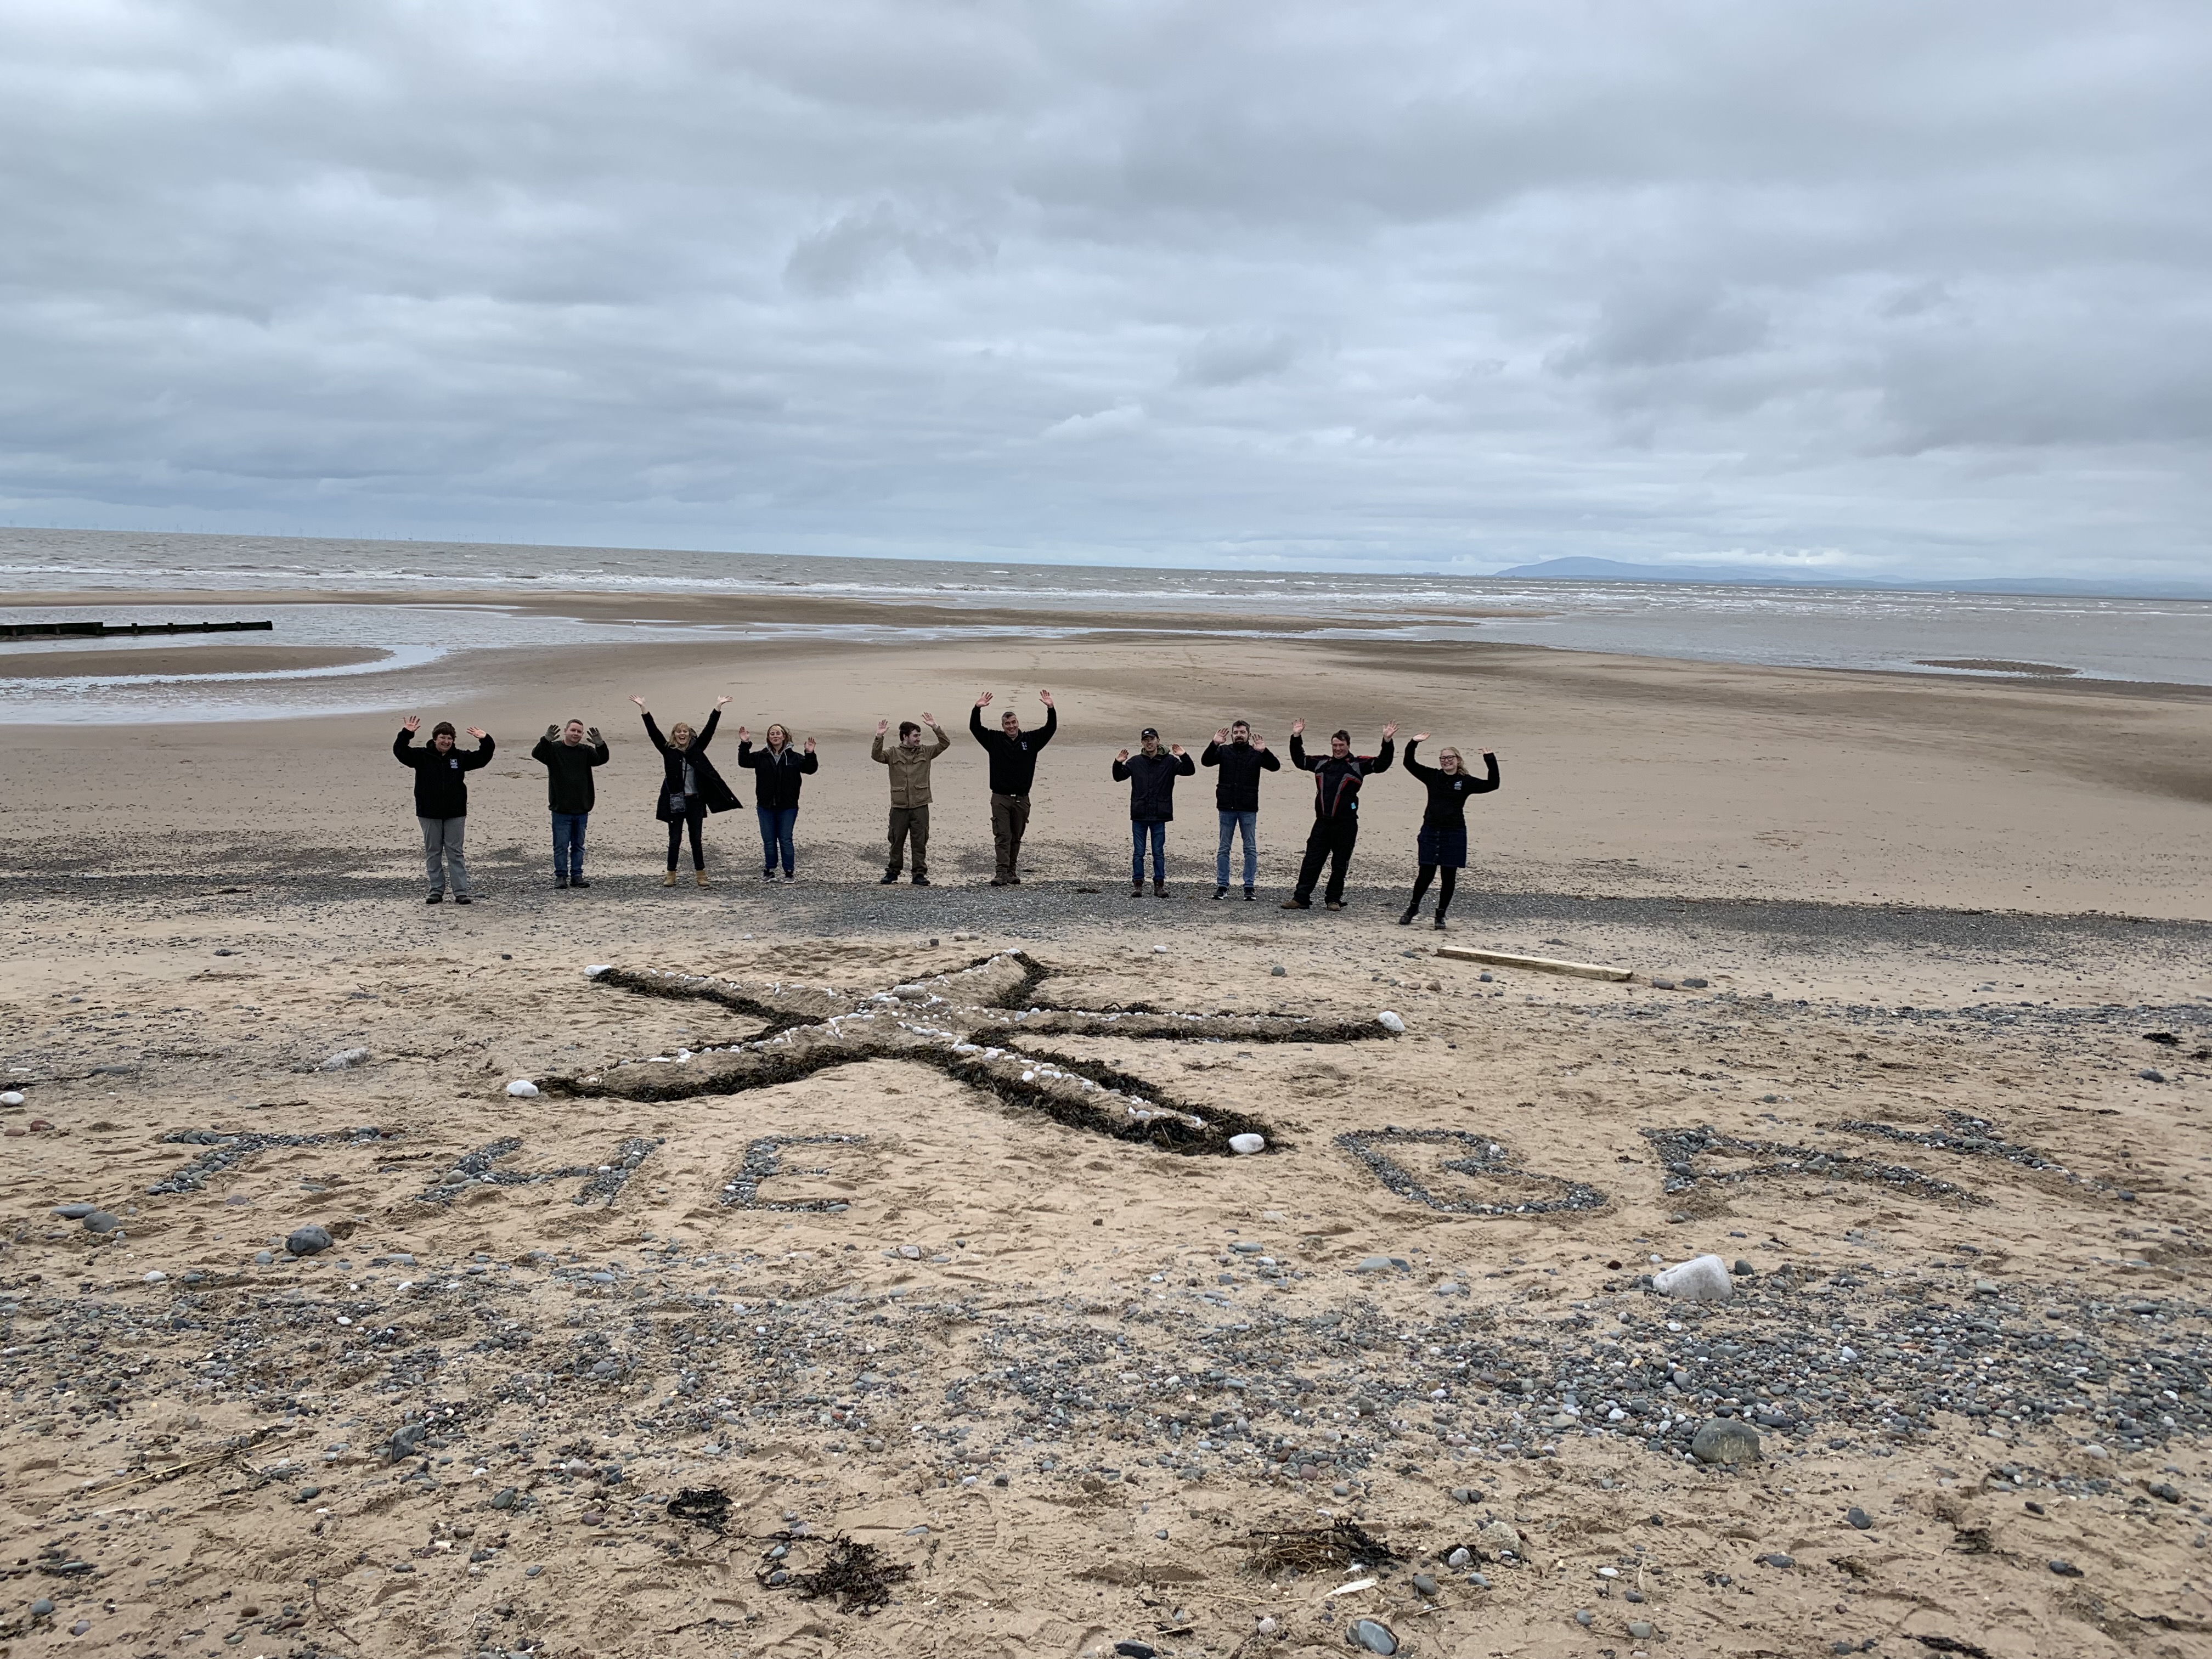 A group of people on a beach taking part in wellbeing activities